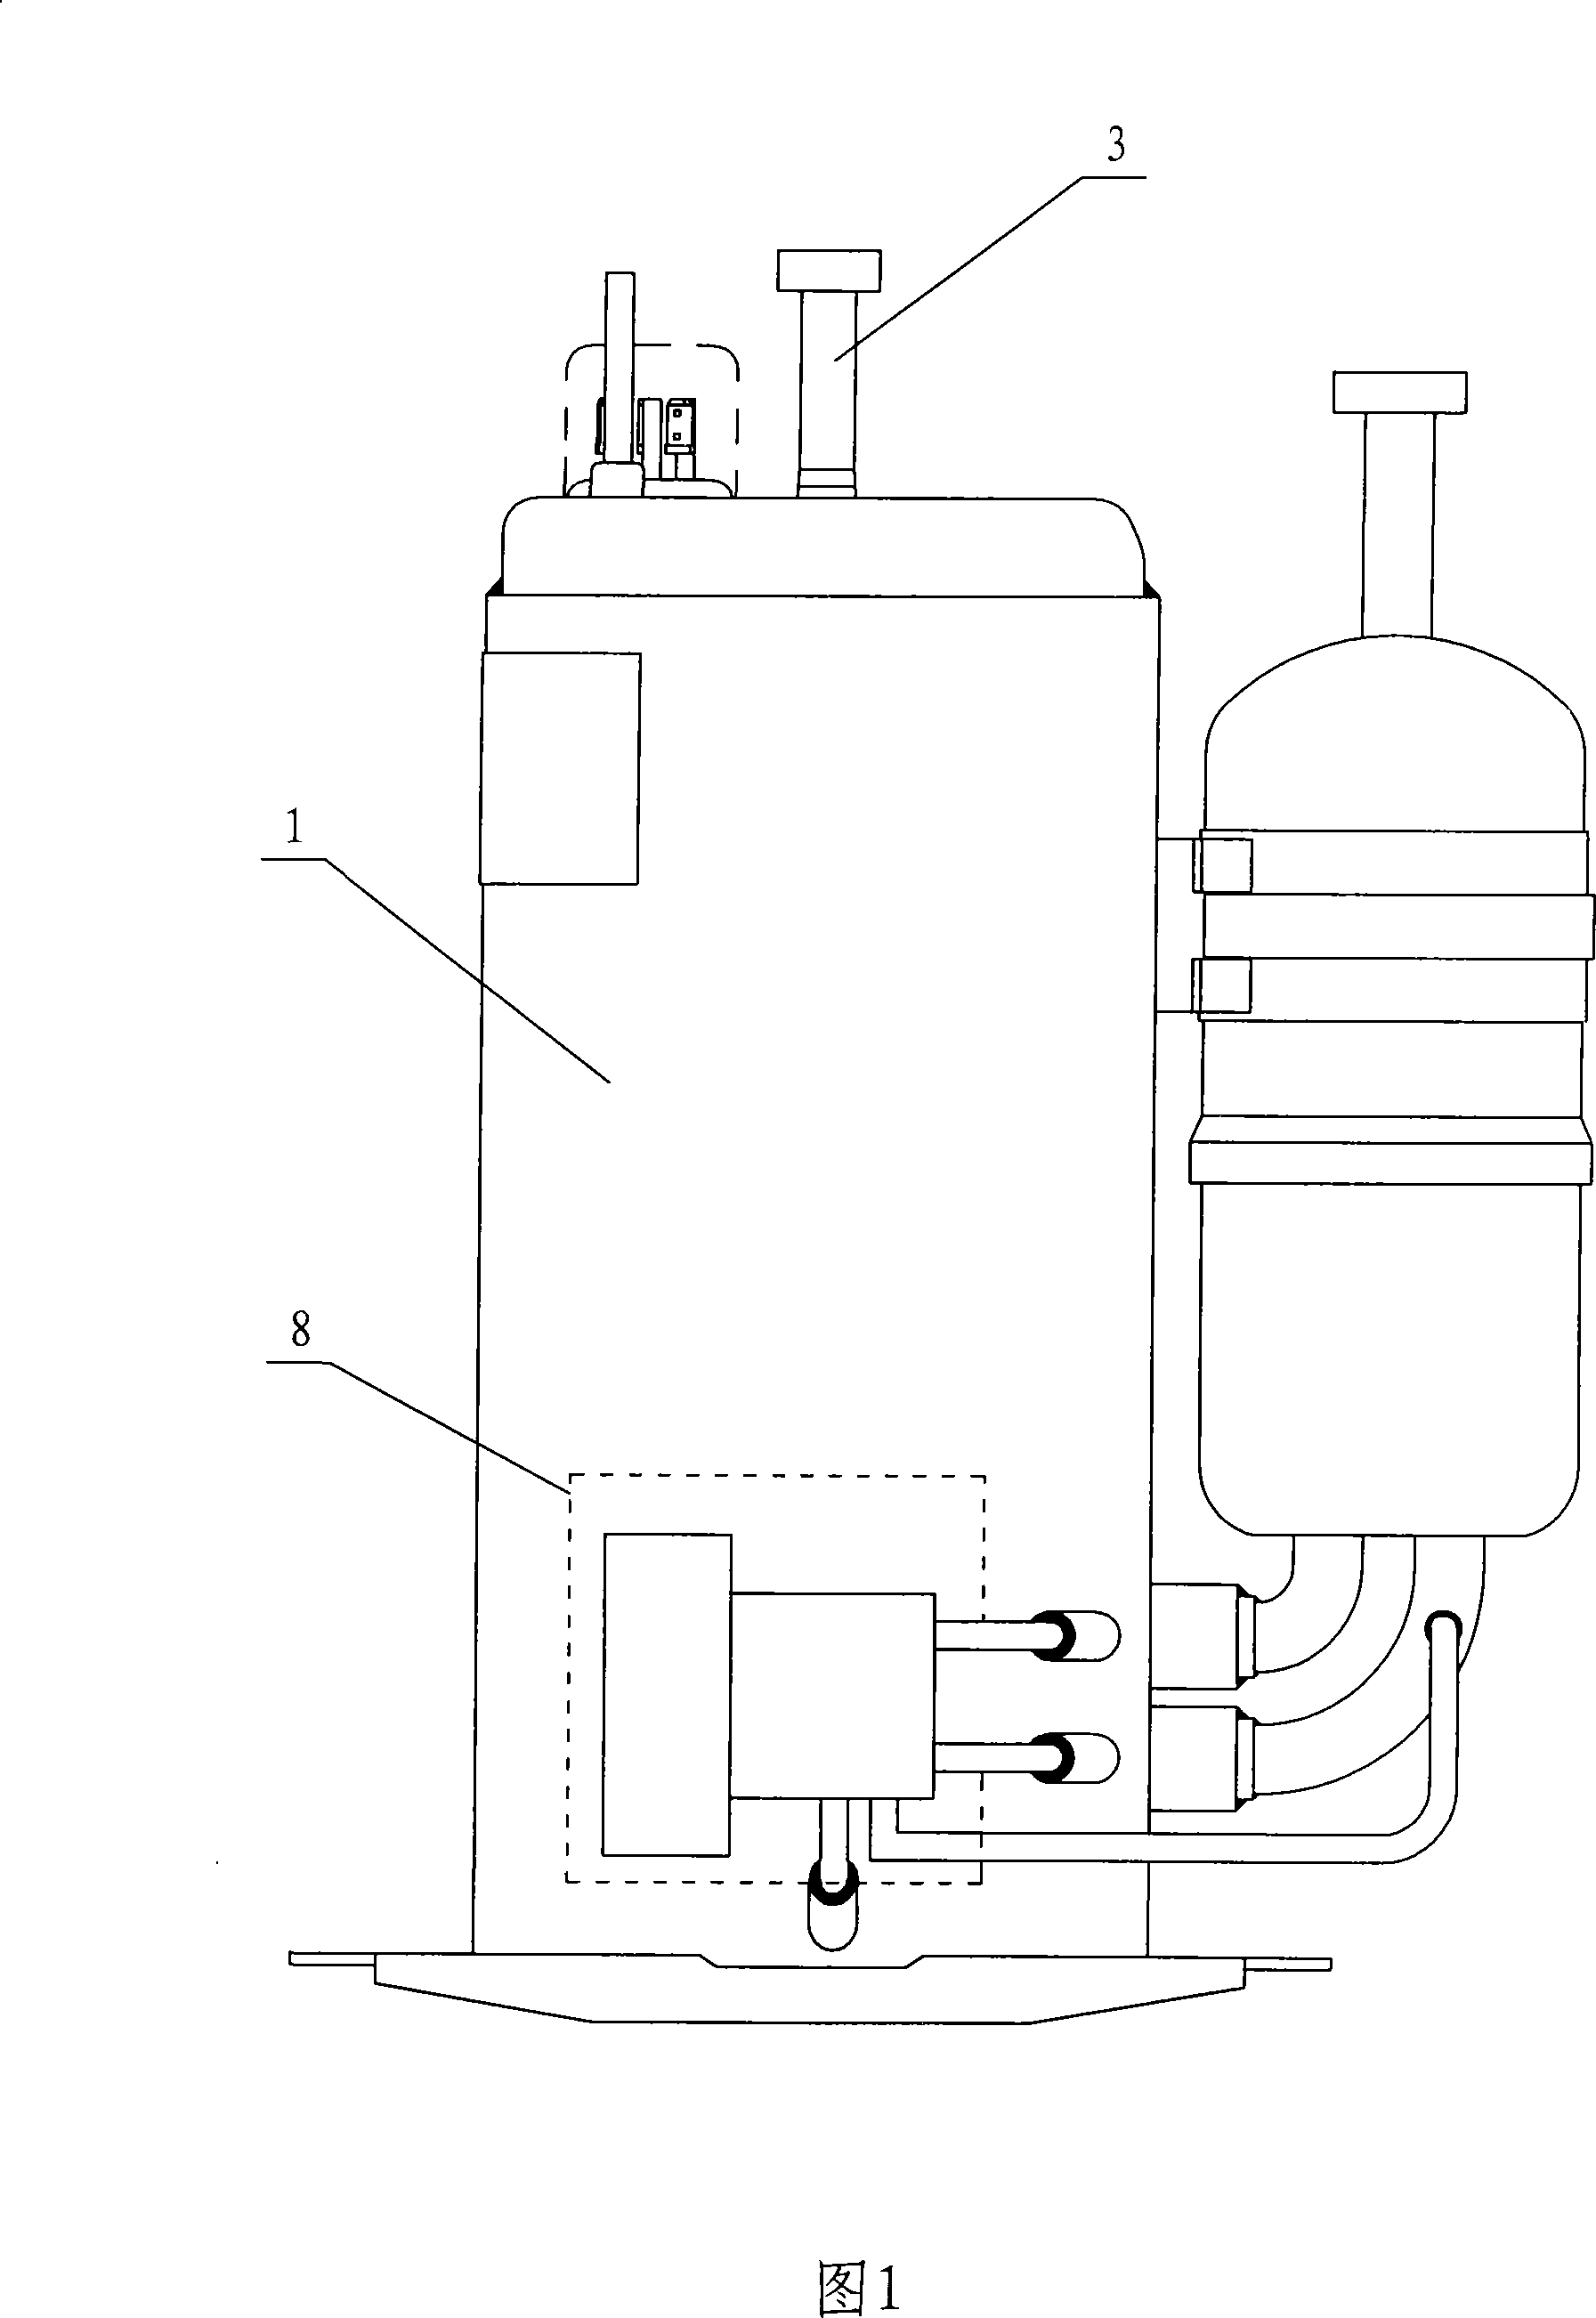 Volume controlled rotary compressor air-breathing device